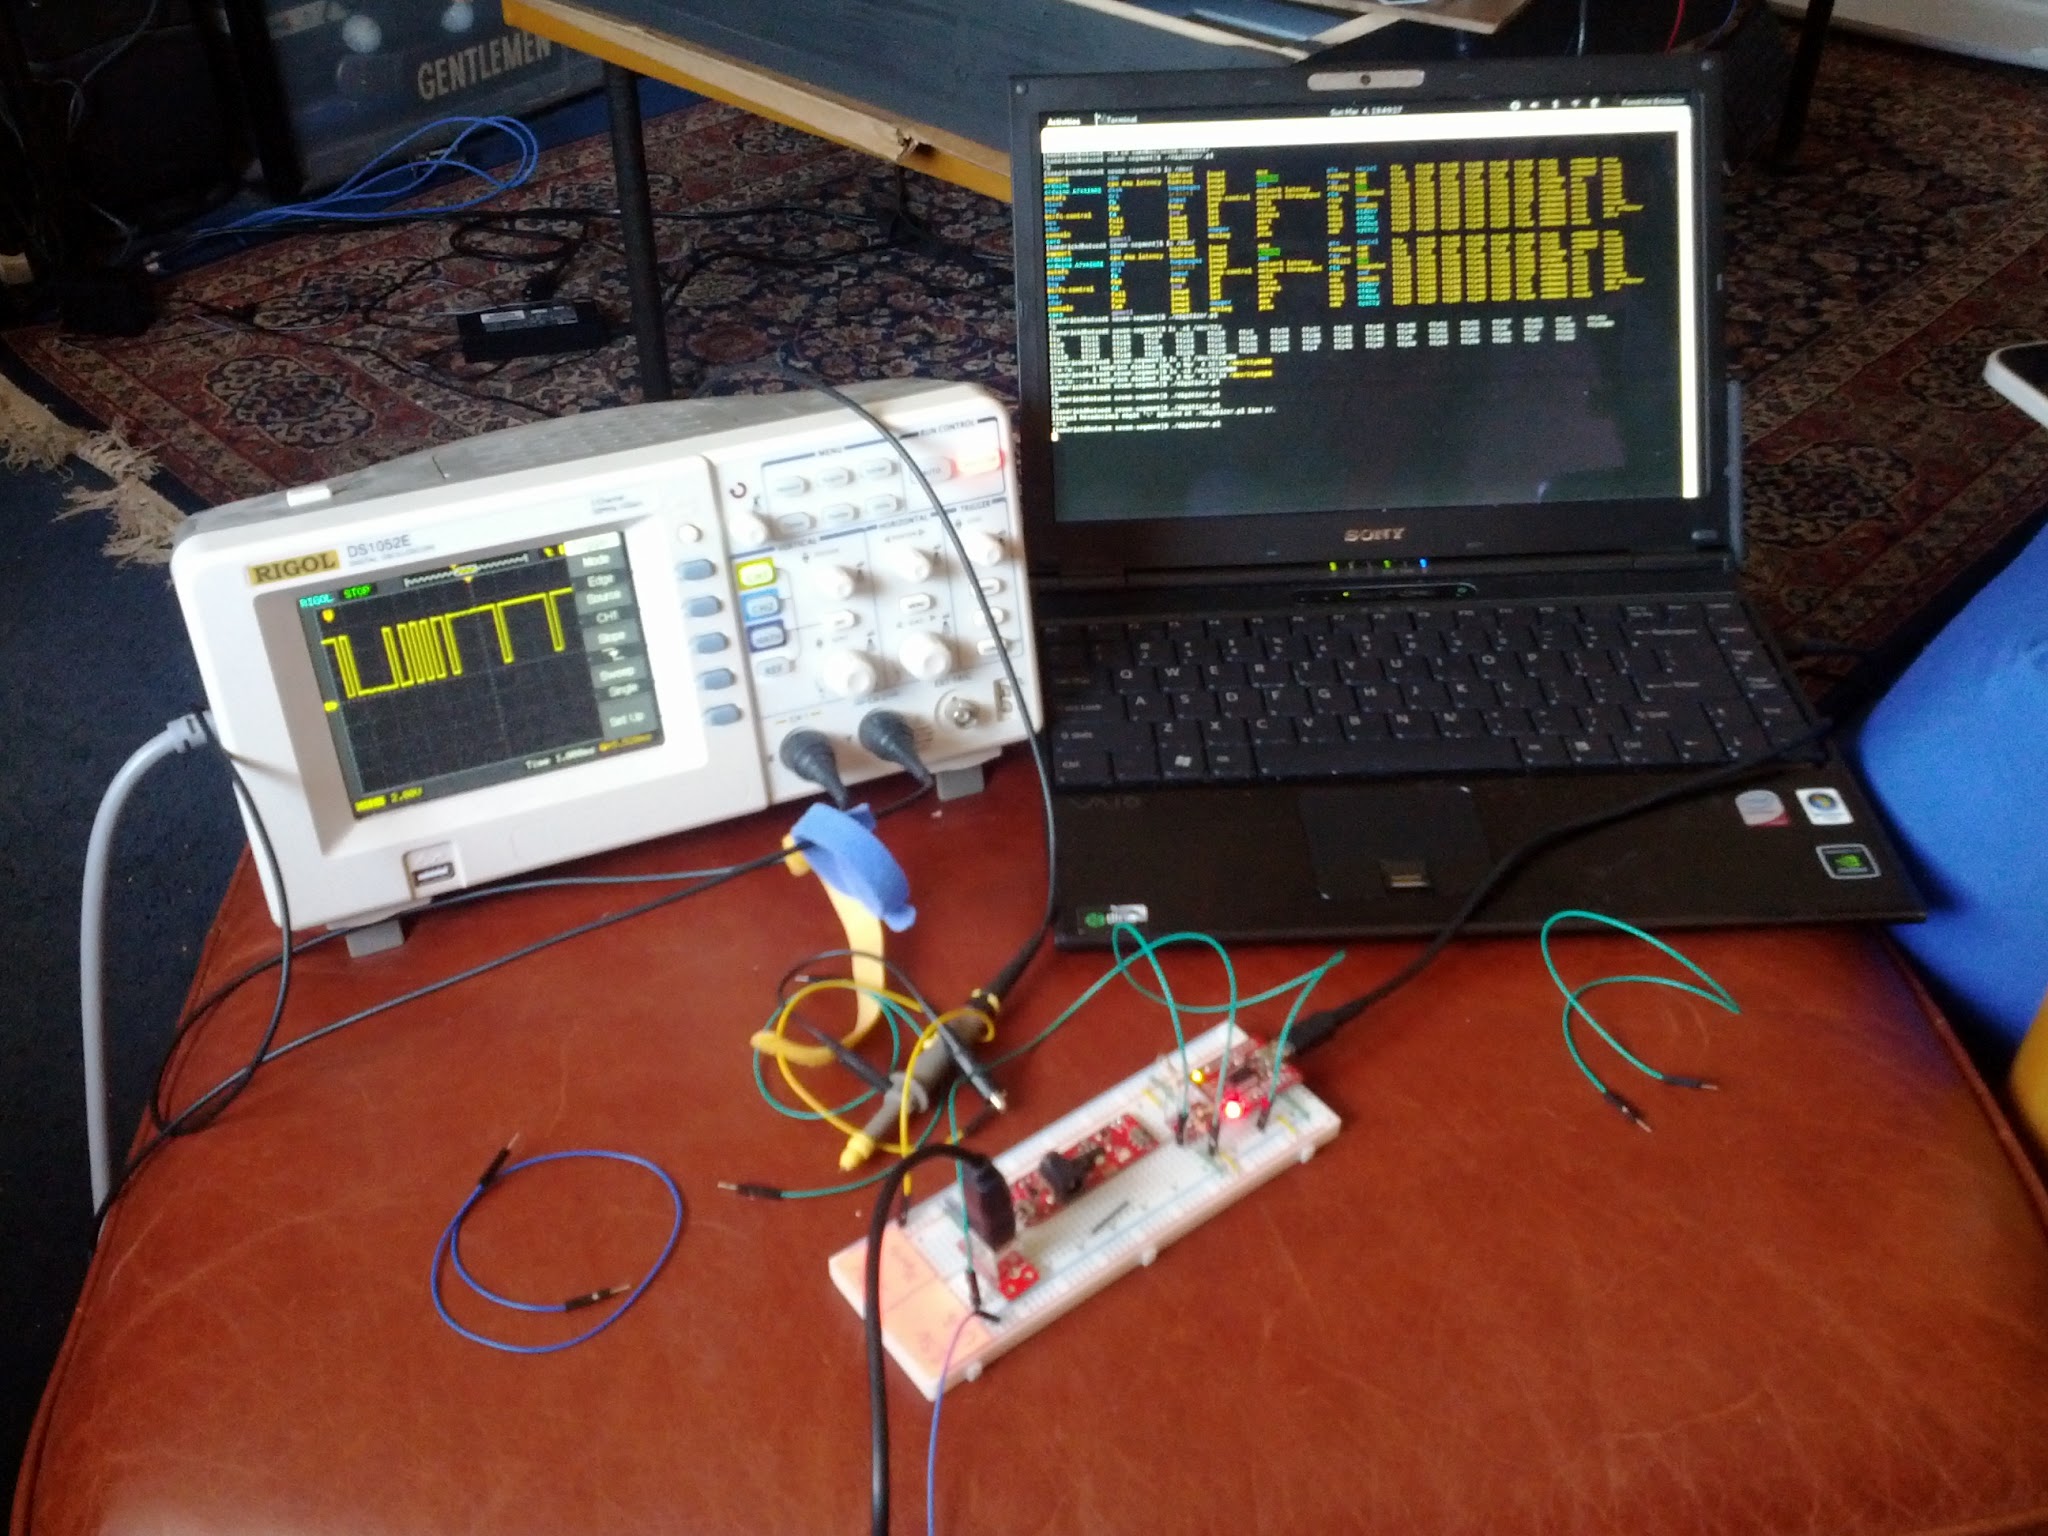 Here's the laptop next to my oscilloscope working on my large seven-segment display project.